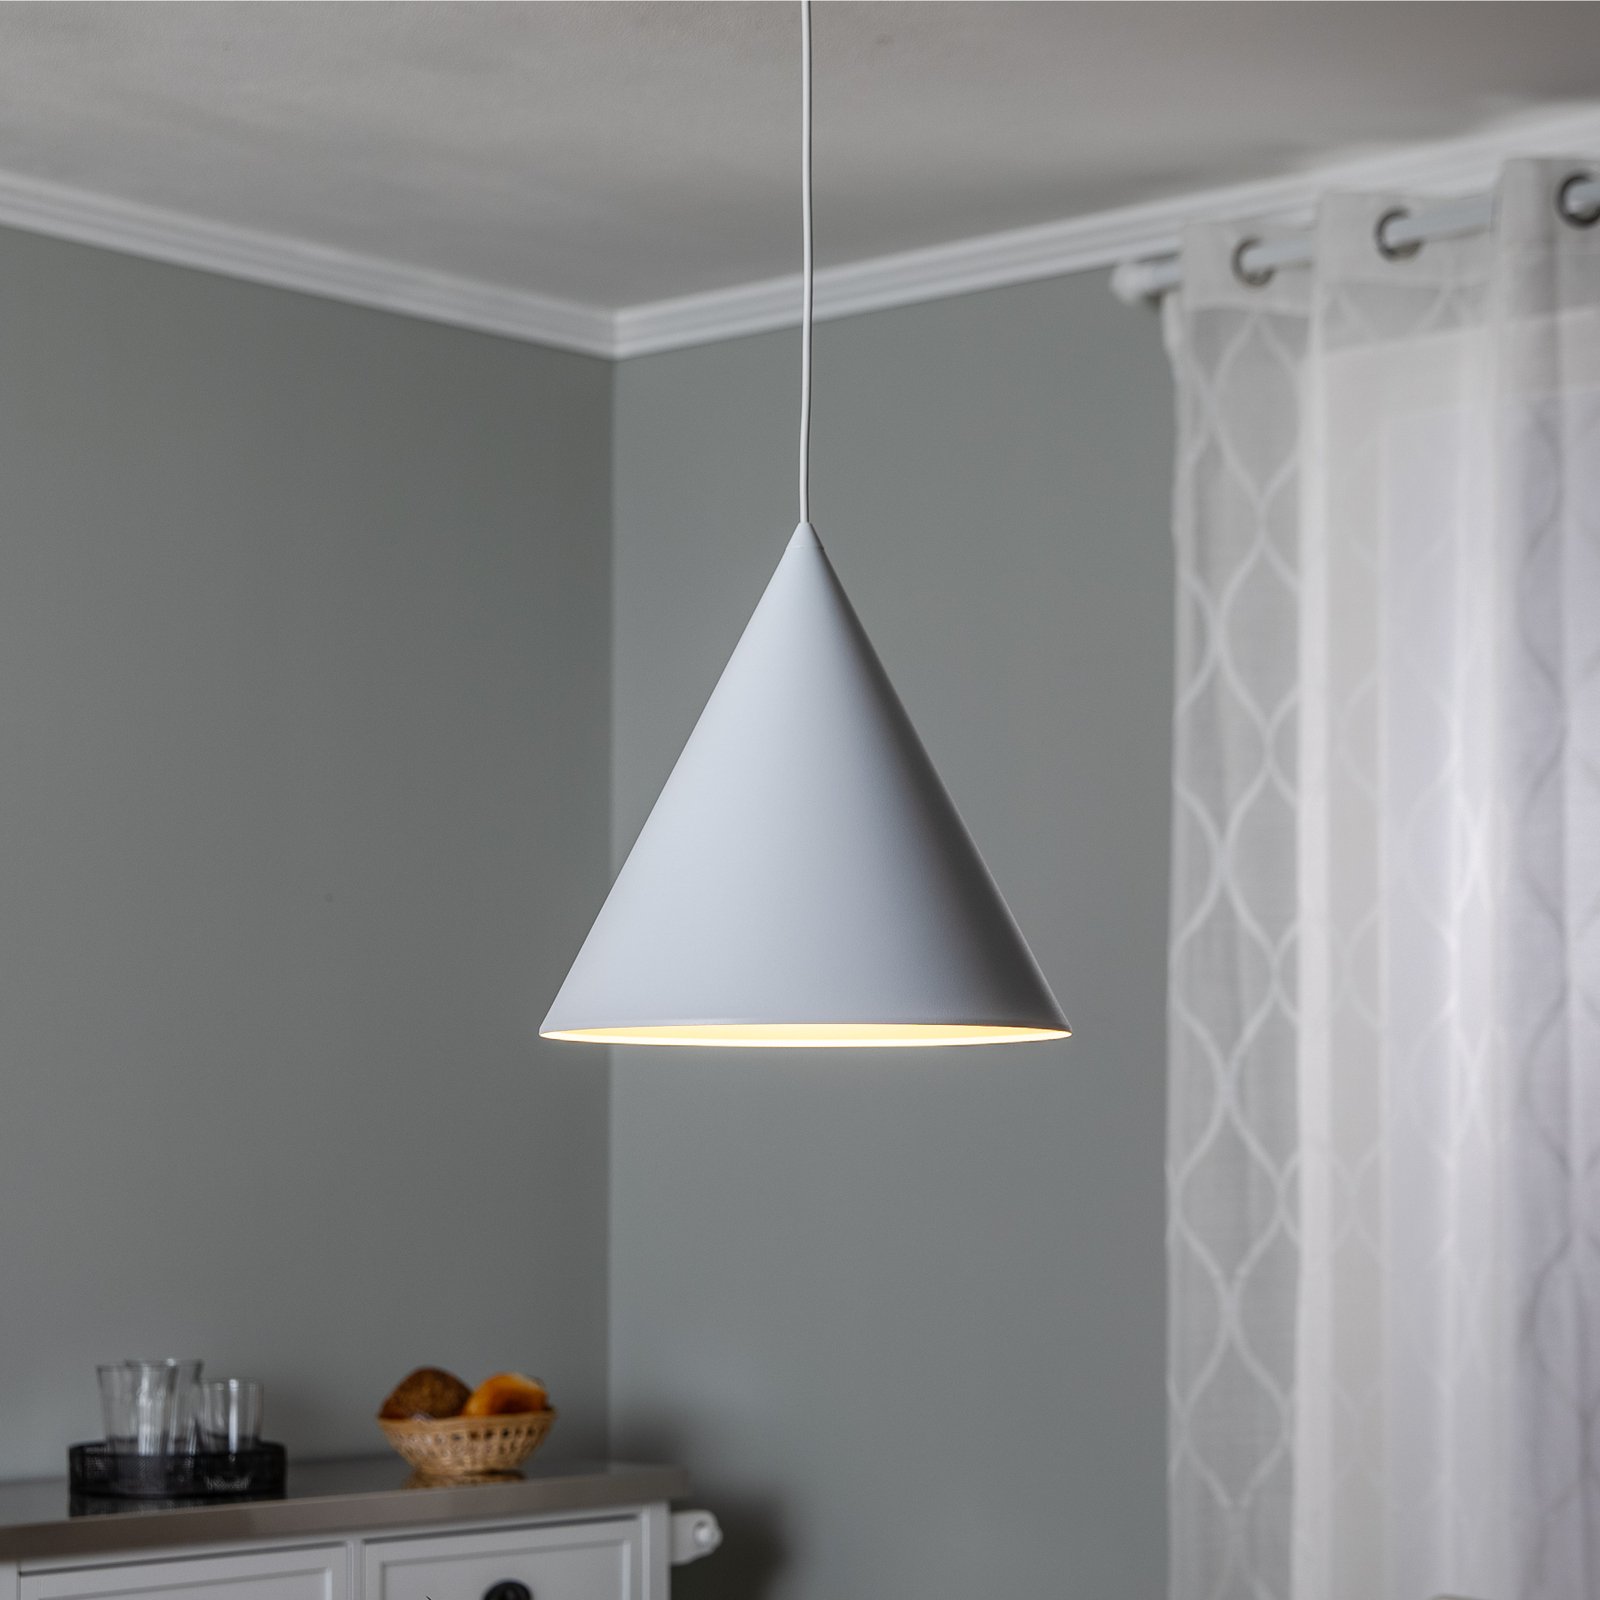 Cono hanglamp, wit, Ø 32 cm, staal, 1-lamp